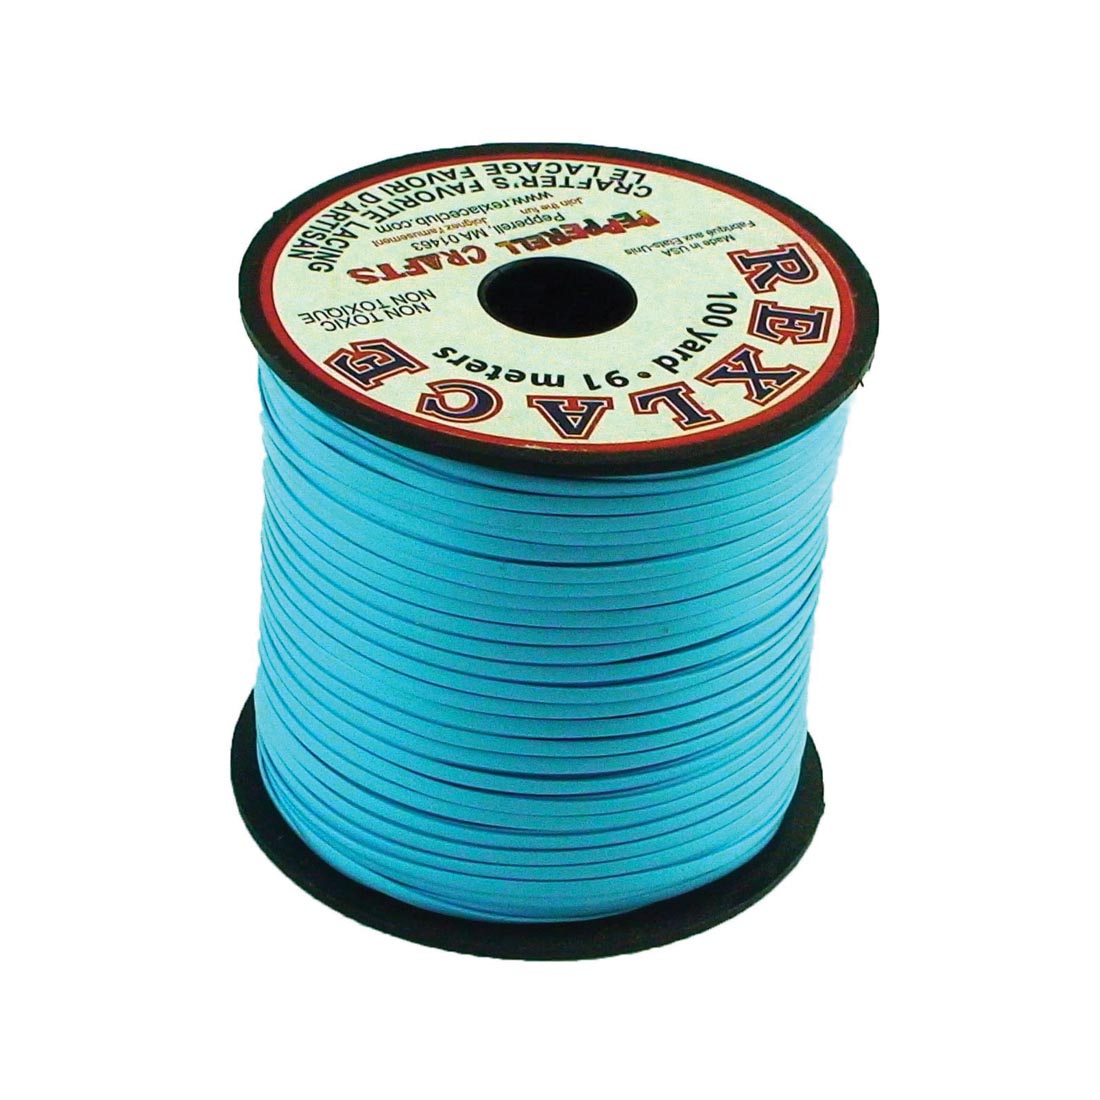 Pepperell Rexlace Plastic Lacing - 100 yards, Baby Blue - image 3 of 4